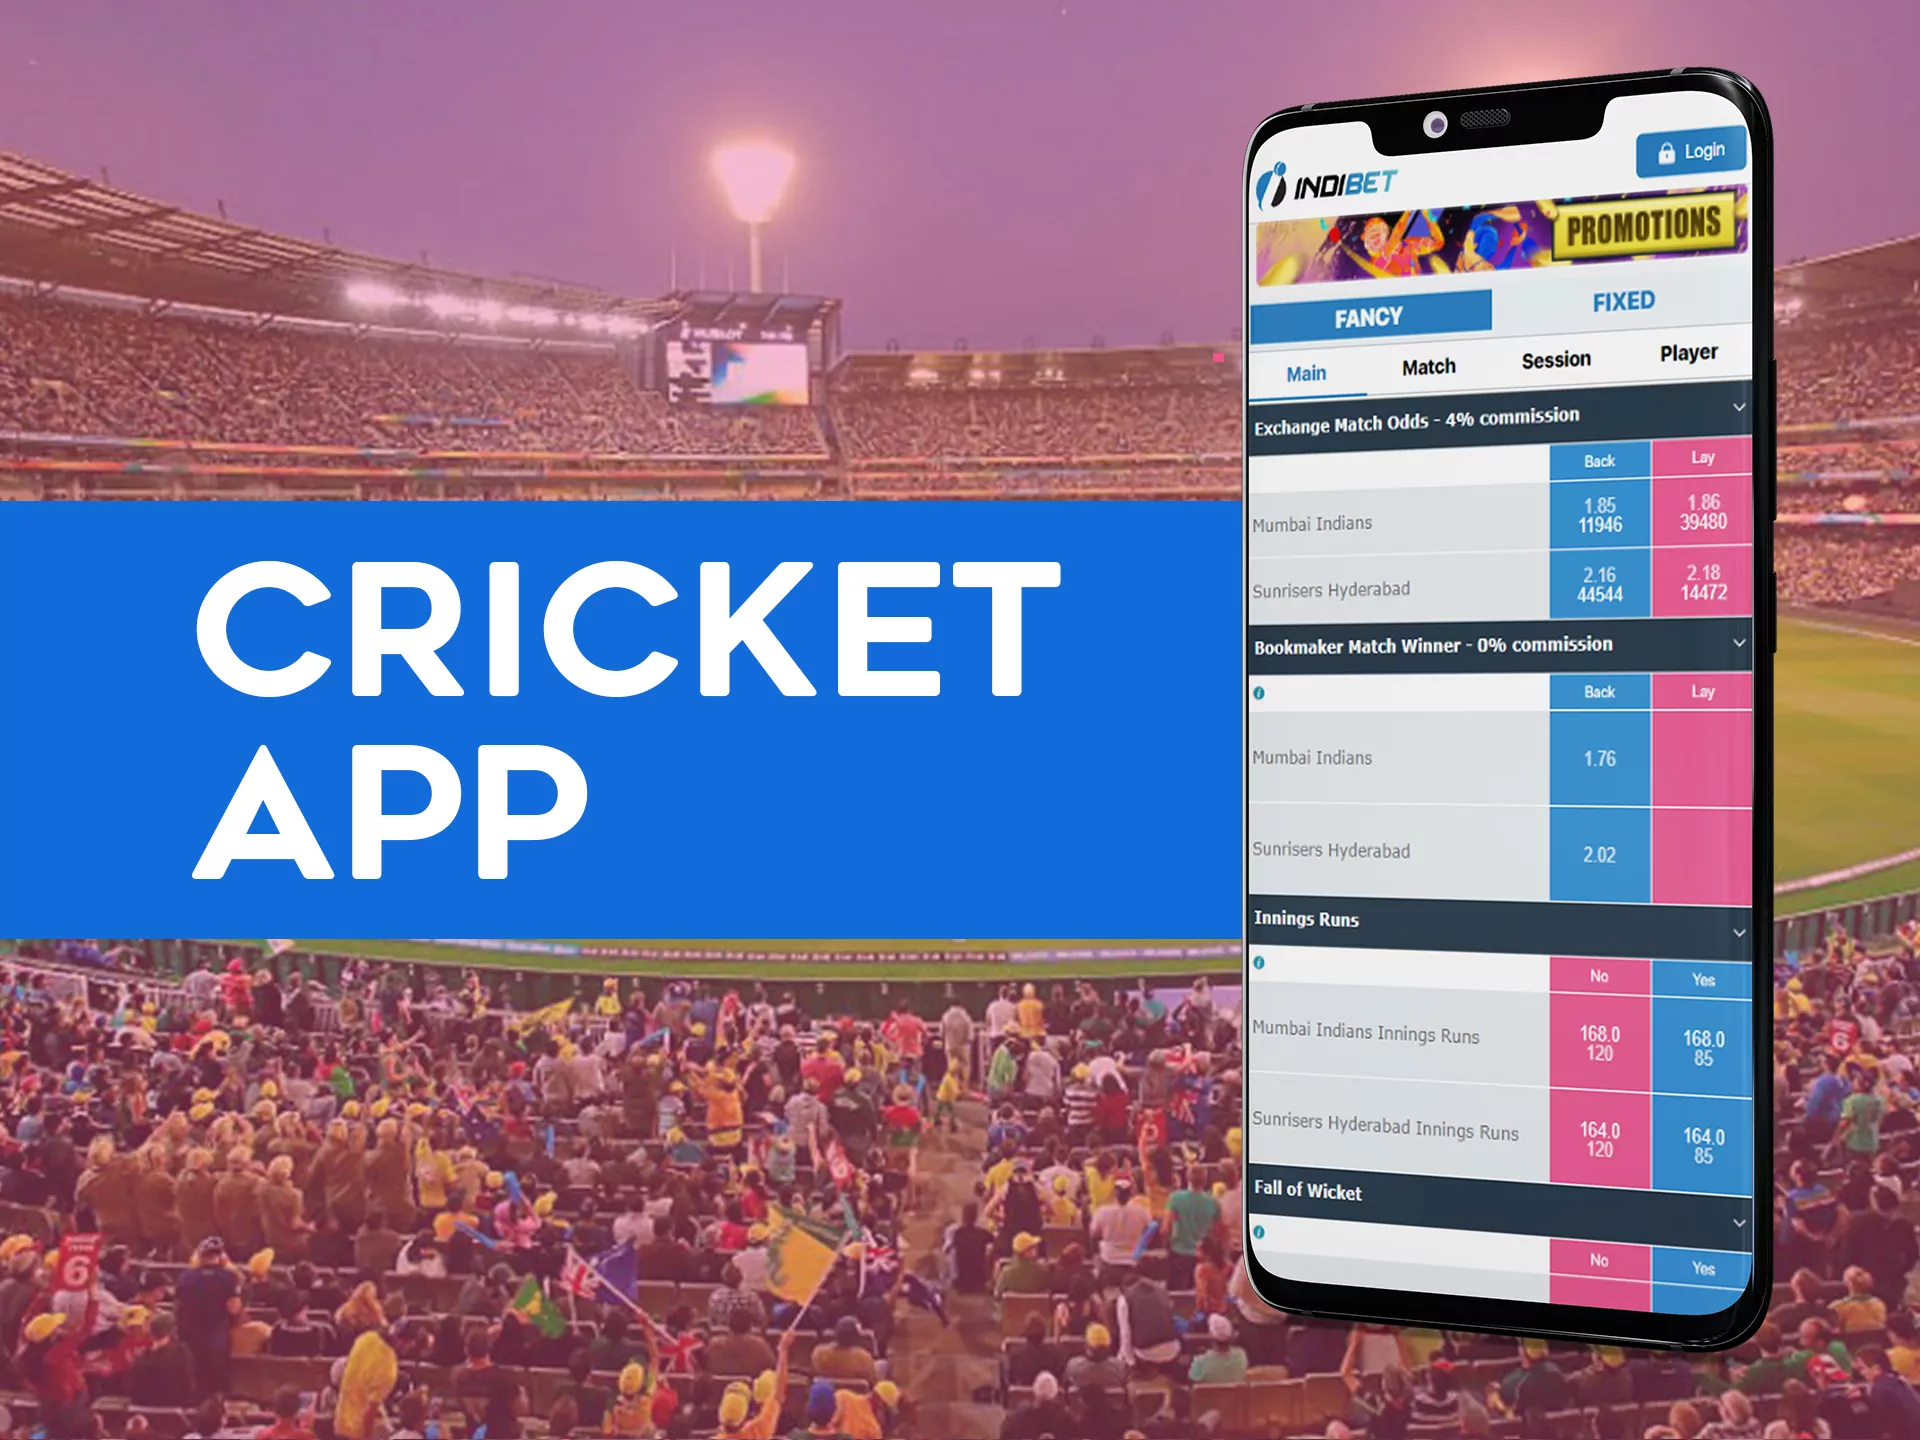 You will find many cricket leagues in the Indibet app.